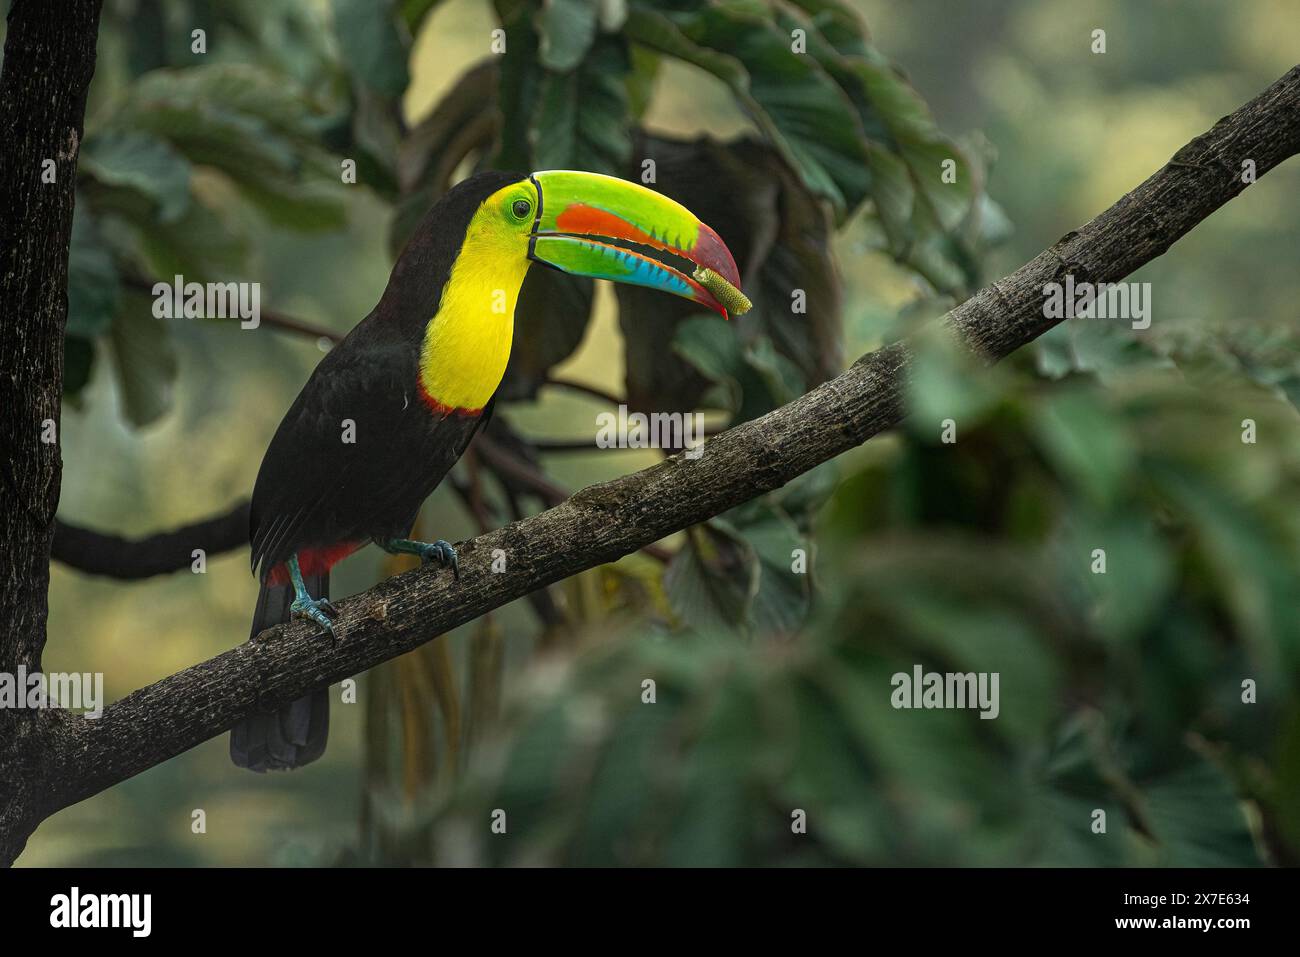 Keel billed toucan perched close up Stock Photo